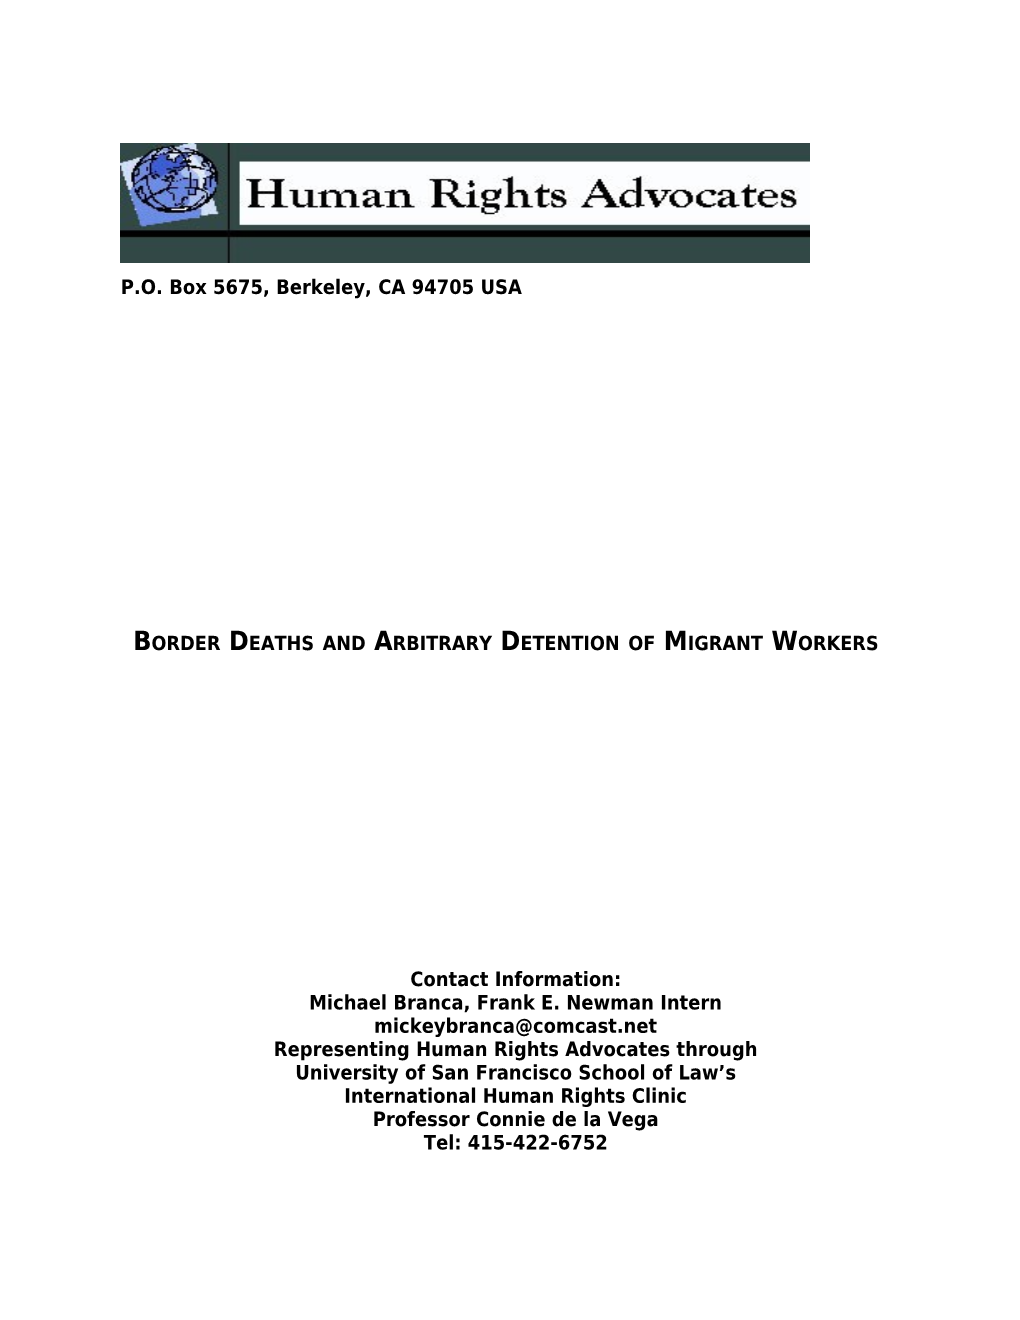 Outline on Migrant Workers Rights